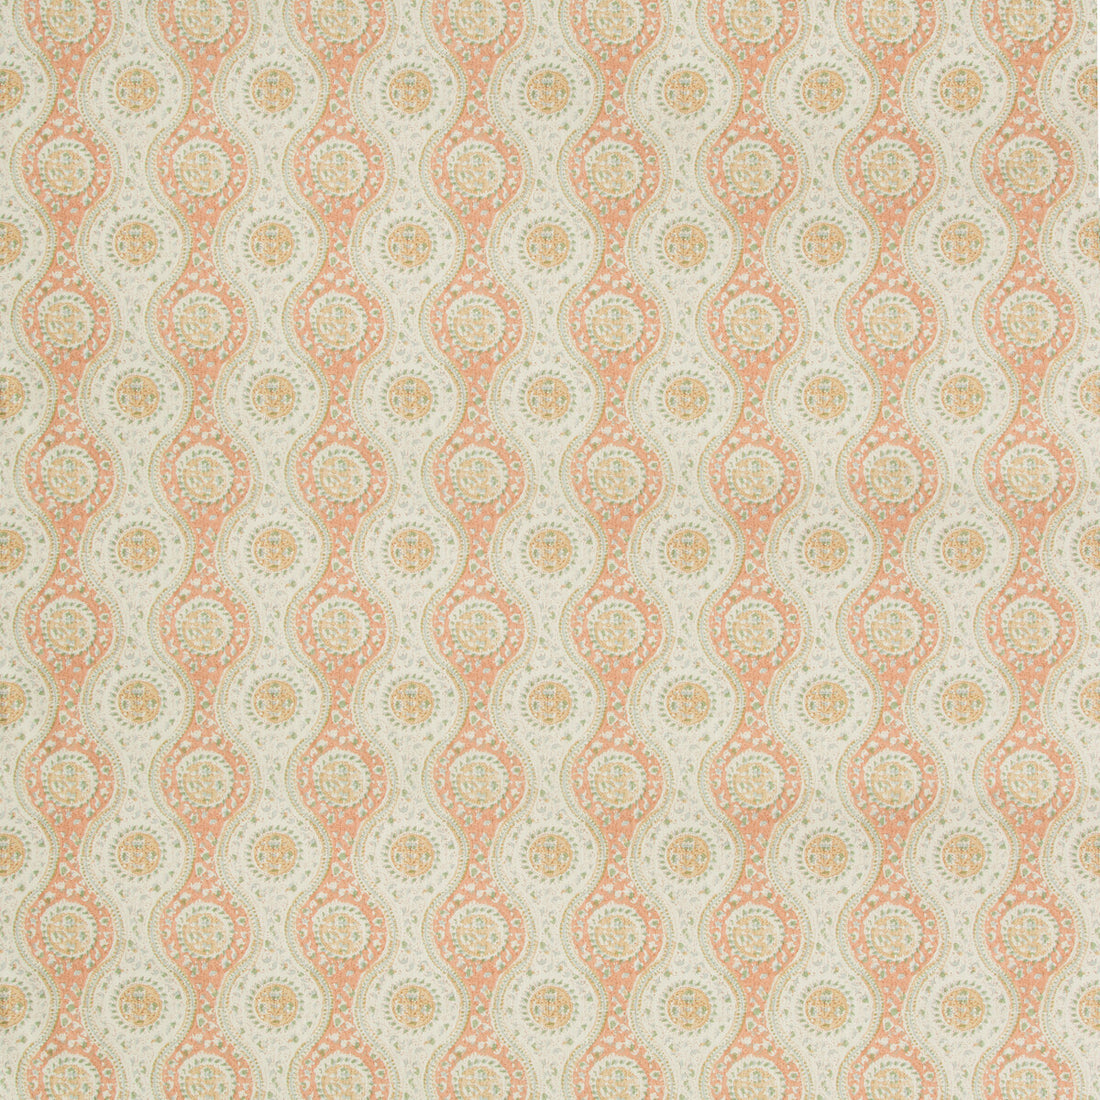 Nadari Print fabric in peach/gold color - pattern 8019129.124.0 - by Brunschwig &amp; Fils in the Folio Francais collection